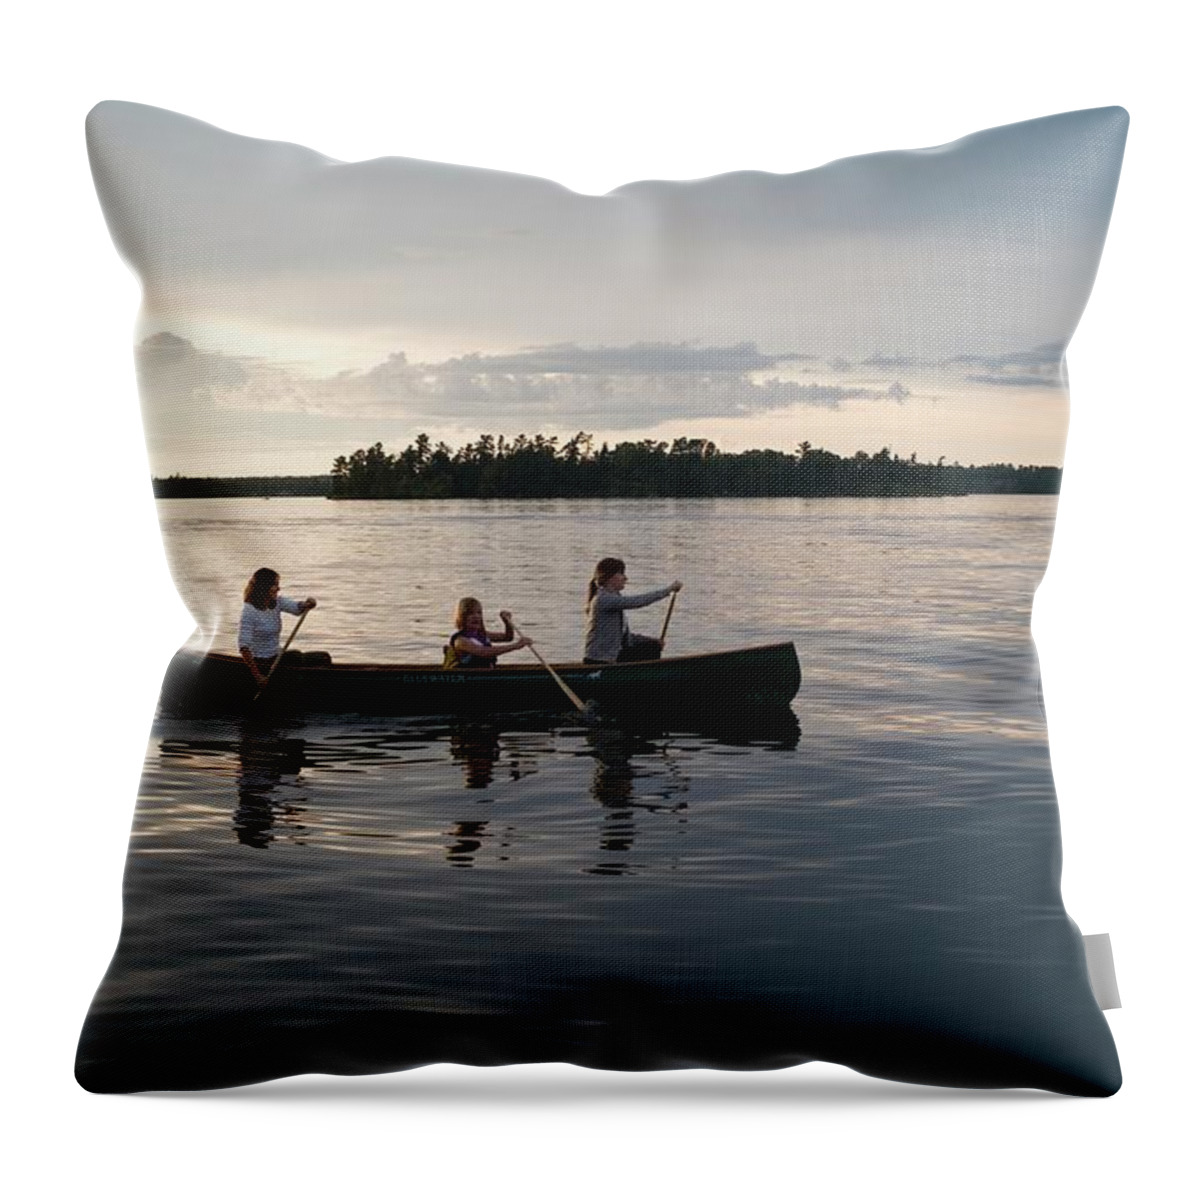 Tranquility Throw Pillow featuring the photograph Lake Of The Woods, Ontario, Canada by Design Pics/keith Levit